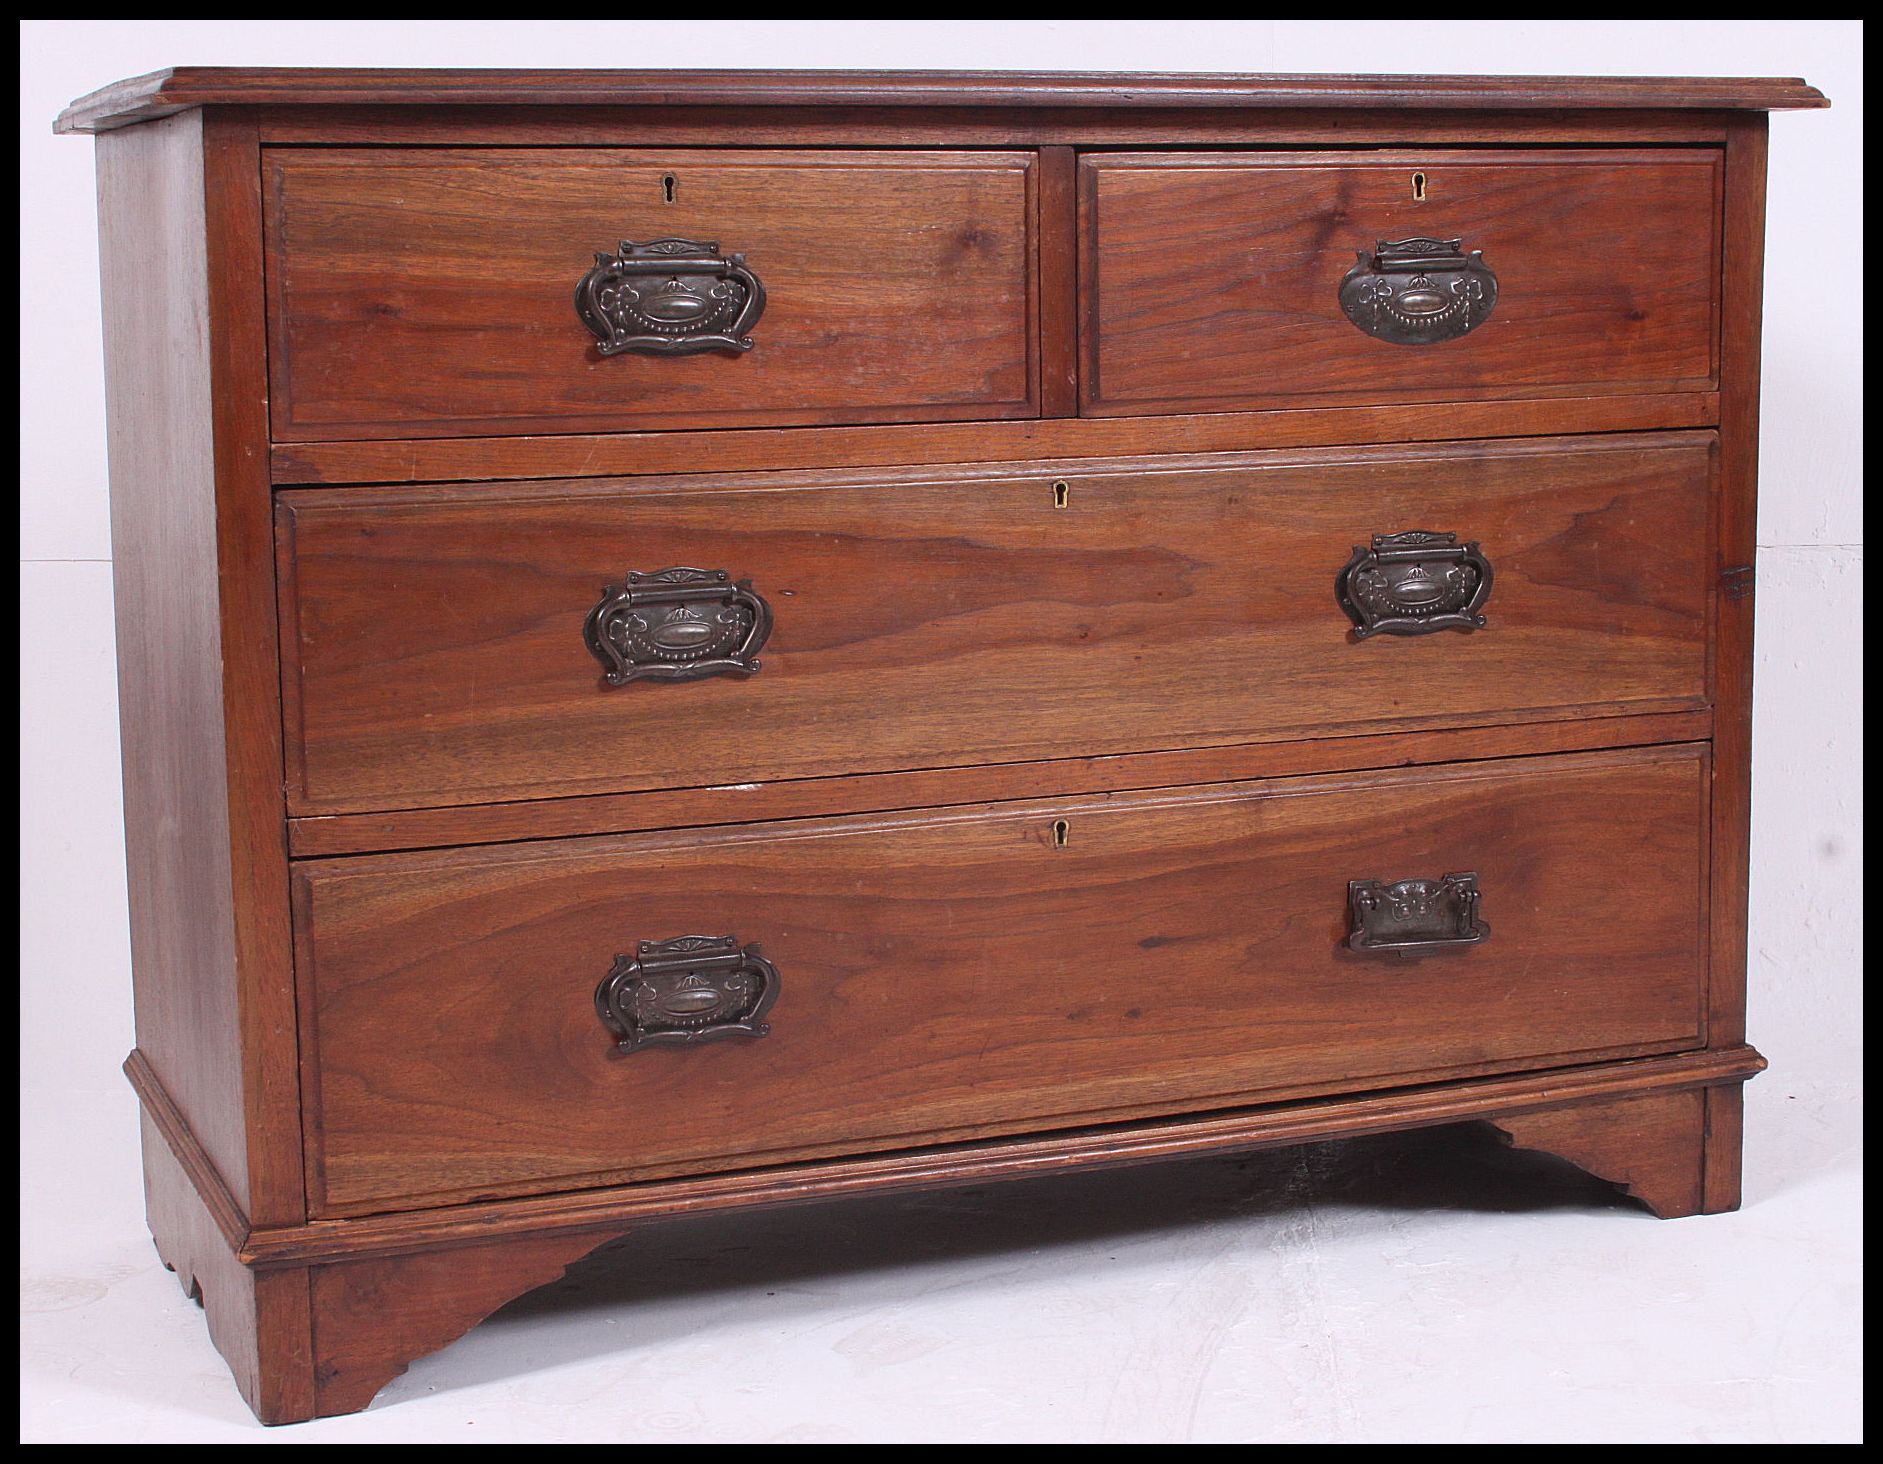 An Edwardian ash / oak wood 2 over 2 cottage chest of drawers.